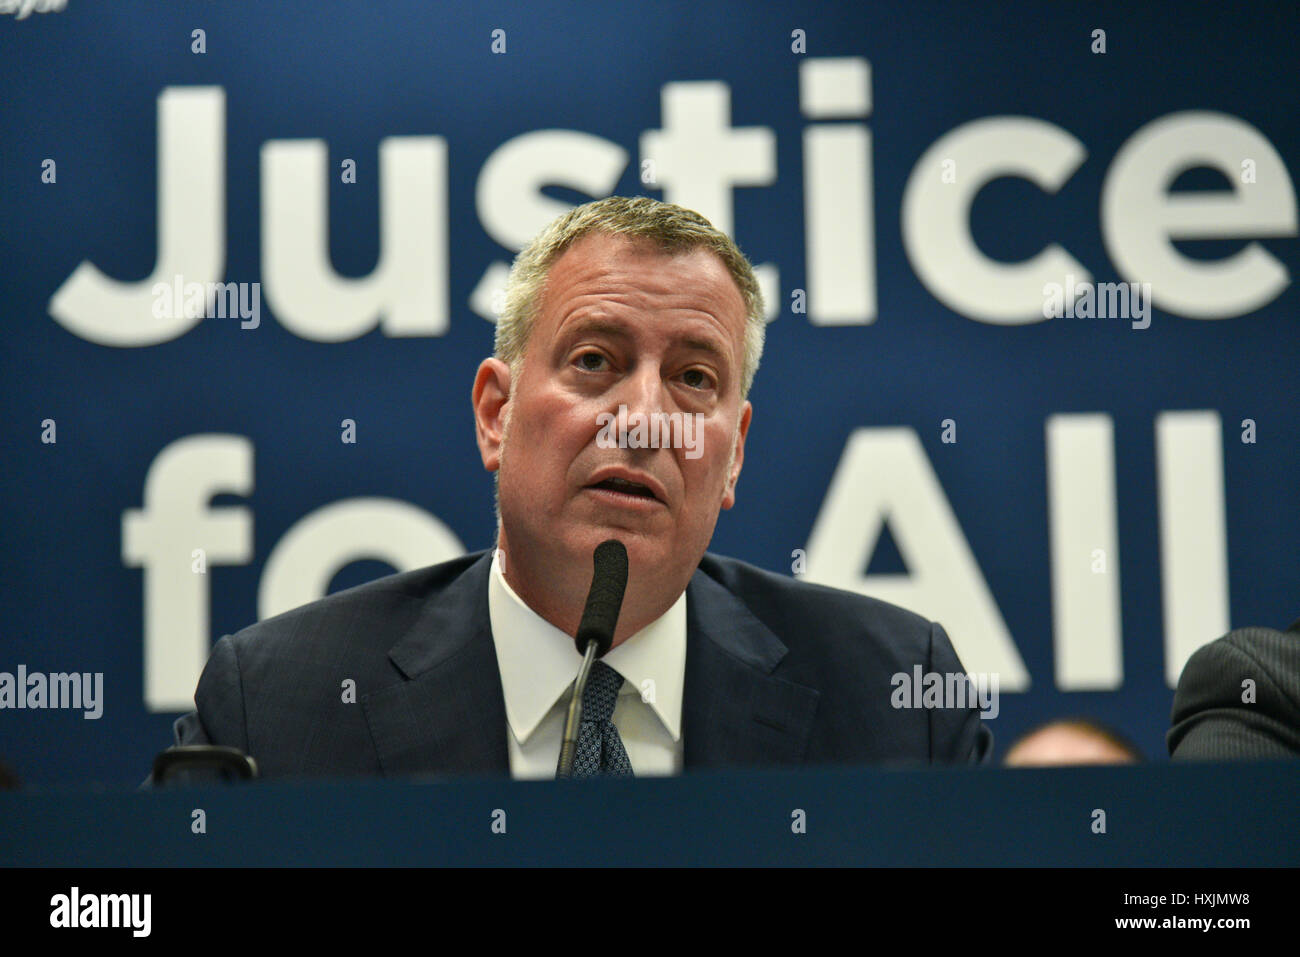 New York, USA. 29th March, 2017. New York City mayor Bill de Blasio announces that by the end of 2017, every person in the Department of Correction’s custody will receive re-entry services to help connect them with jobs and opportunities outside of jail. Credit: Erik Pendzich/Alamy Live News Stock Photo